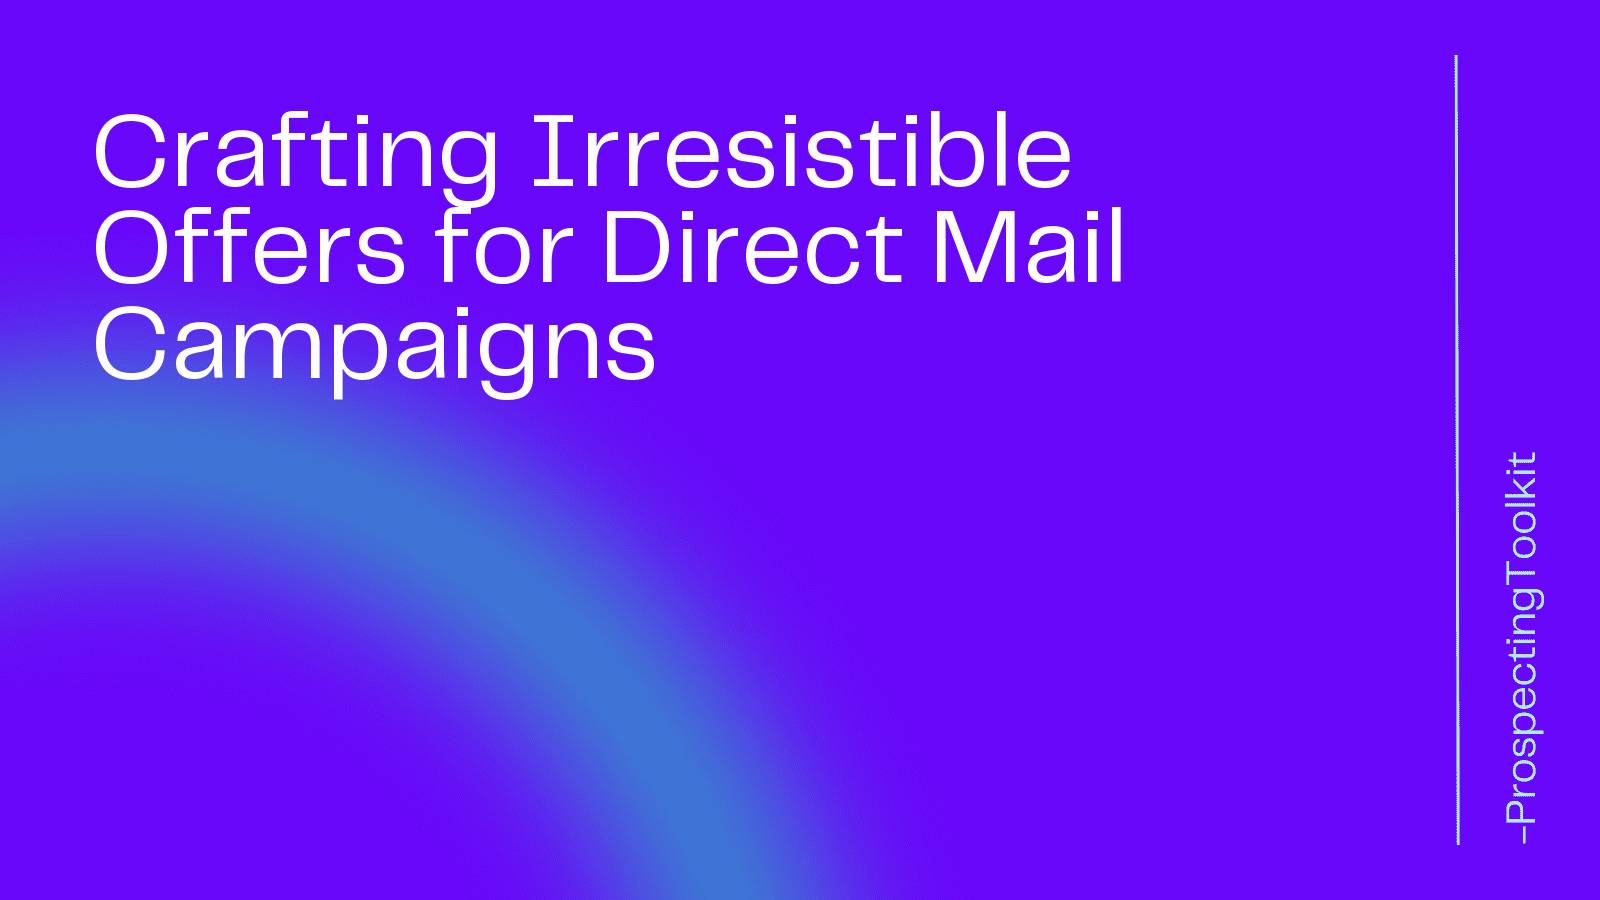 Crafting Irresistible Offers for Direct Mail Campaigns